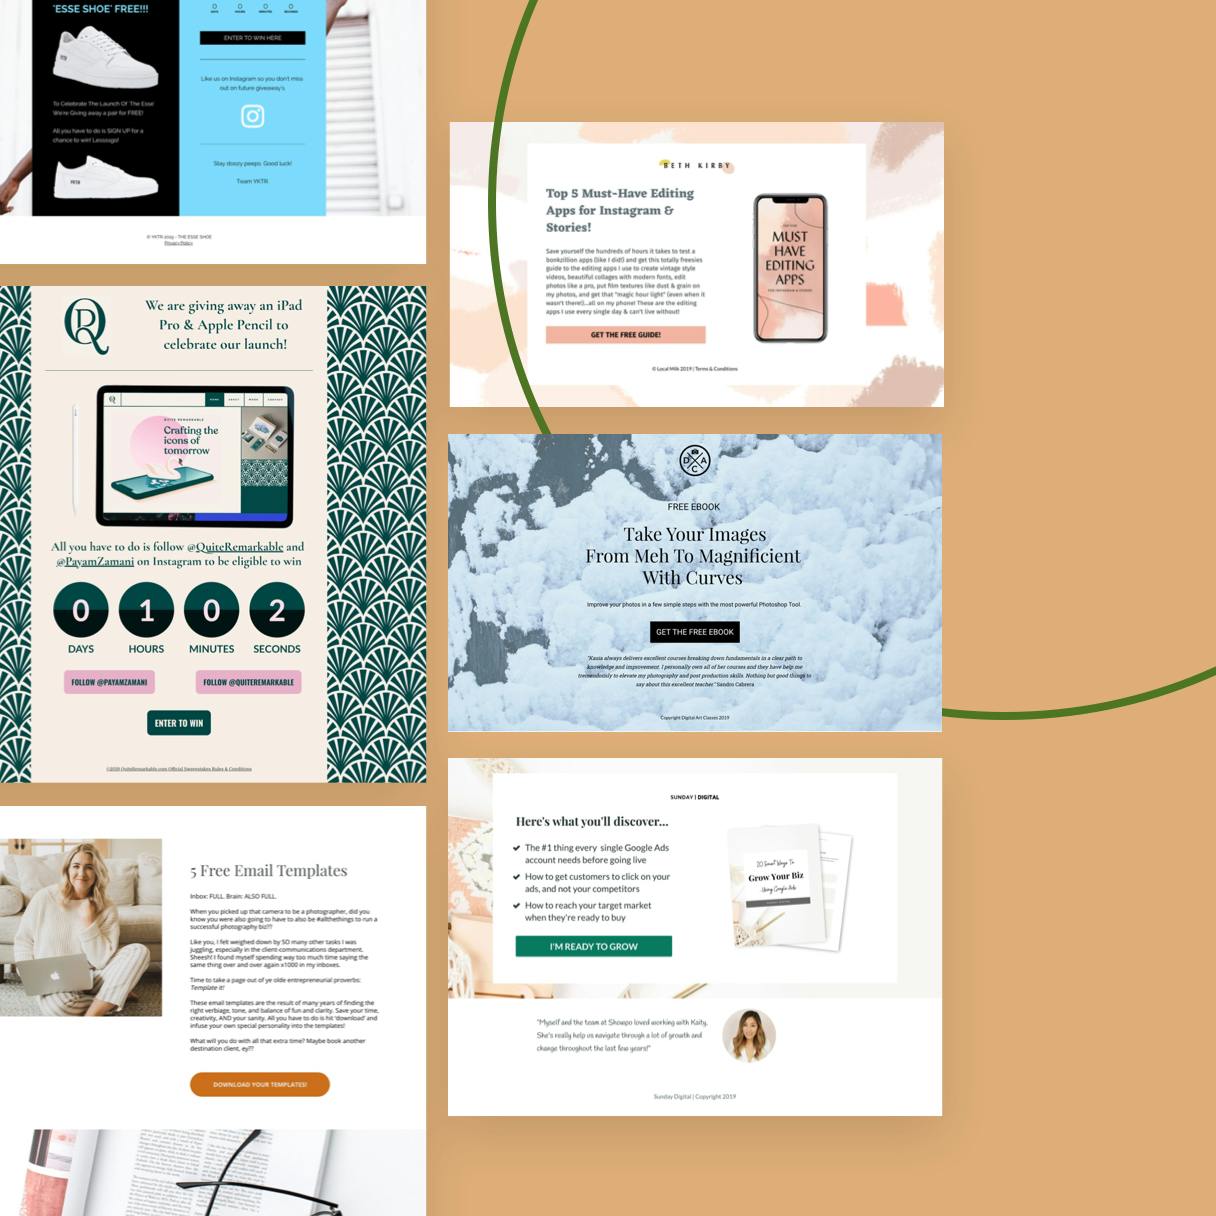 Get Inspired with 100+ Landing Page Examples